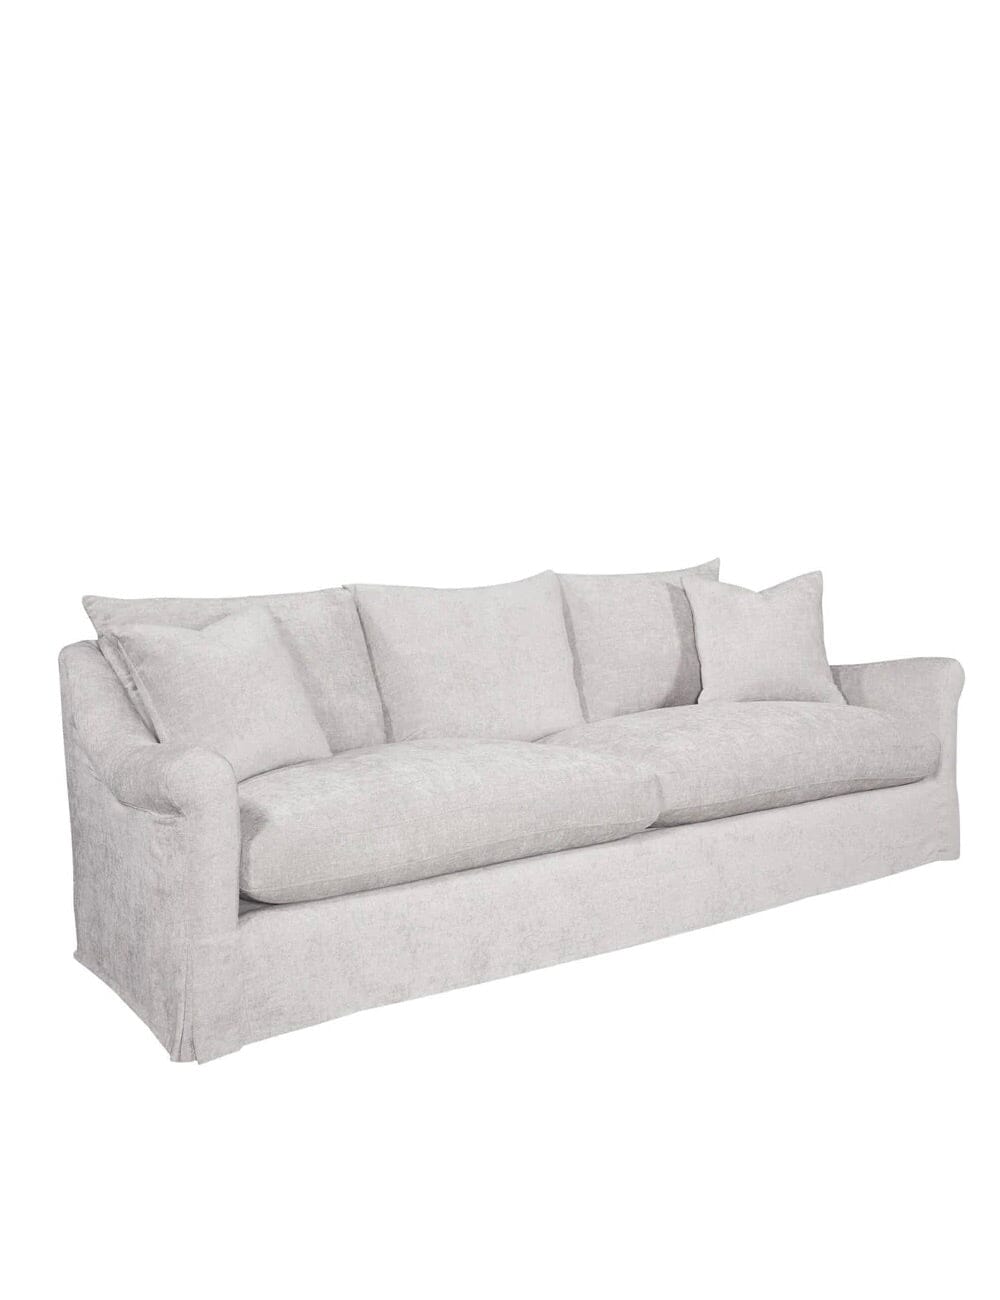 Antioch 104" Performance Slipcover Sofa by Huck & Peck SOFA Huck and Peck